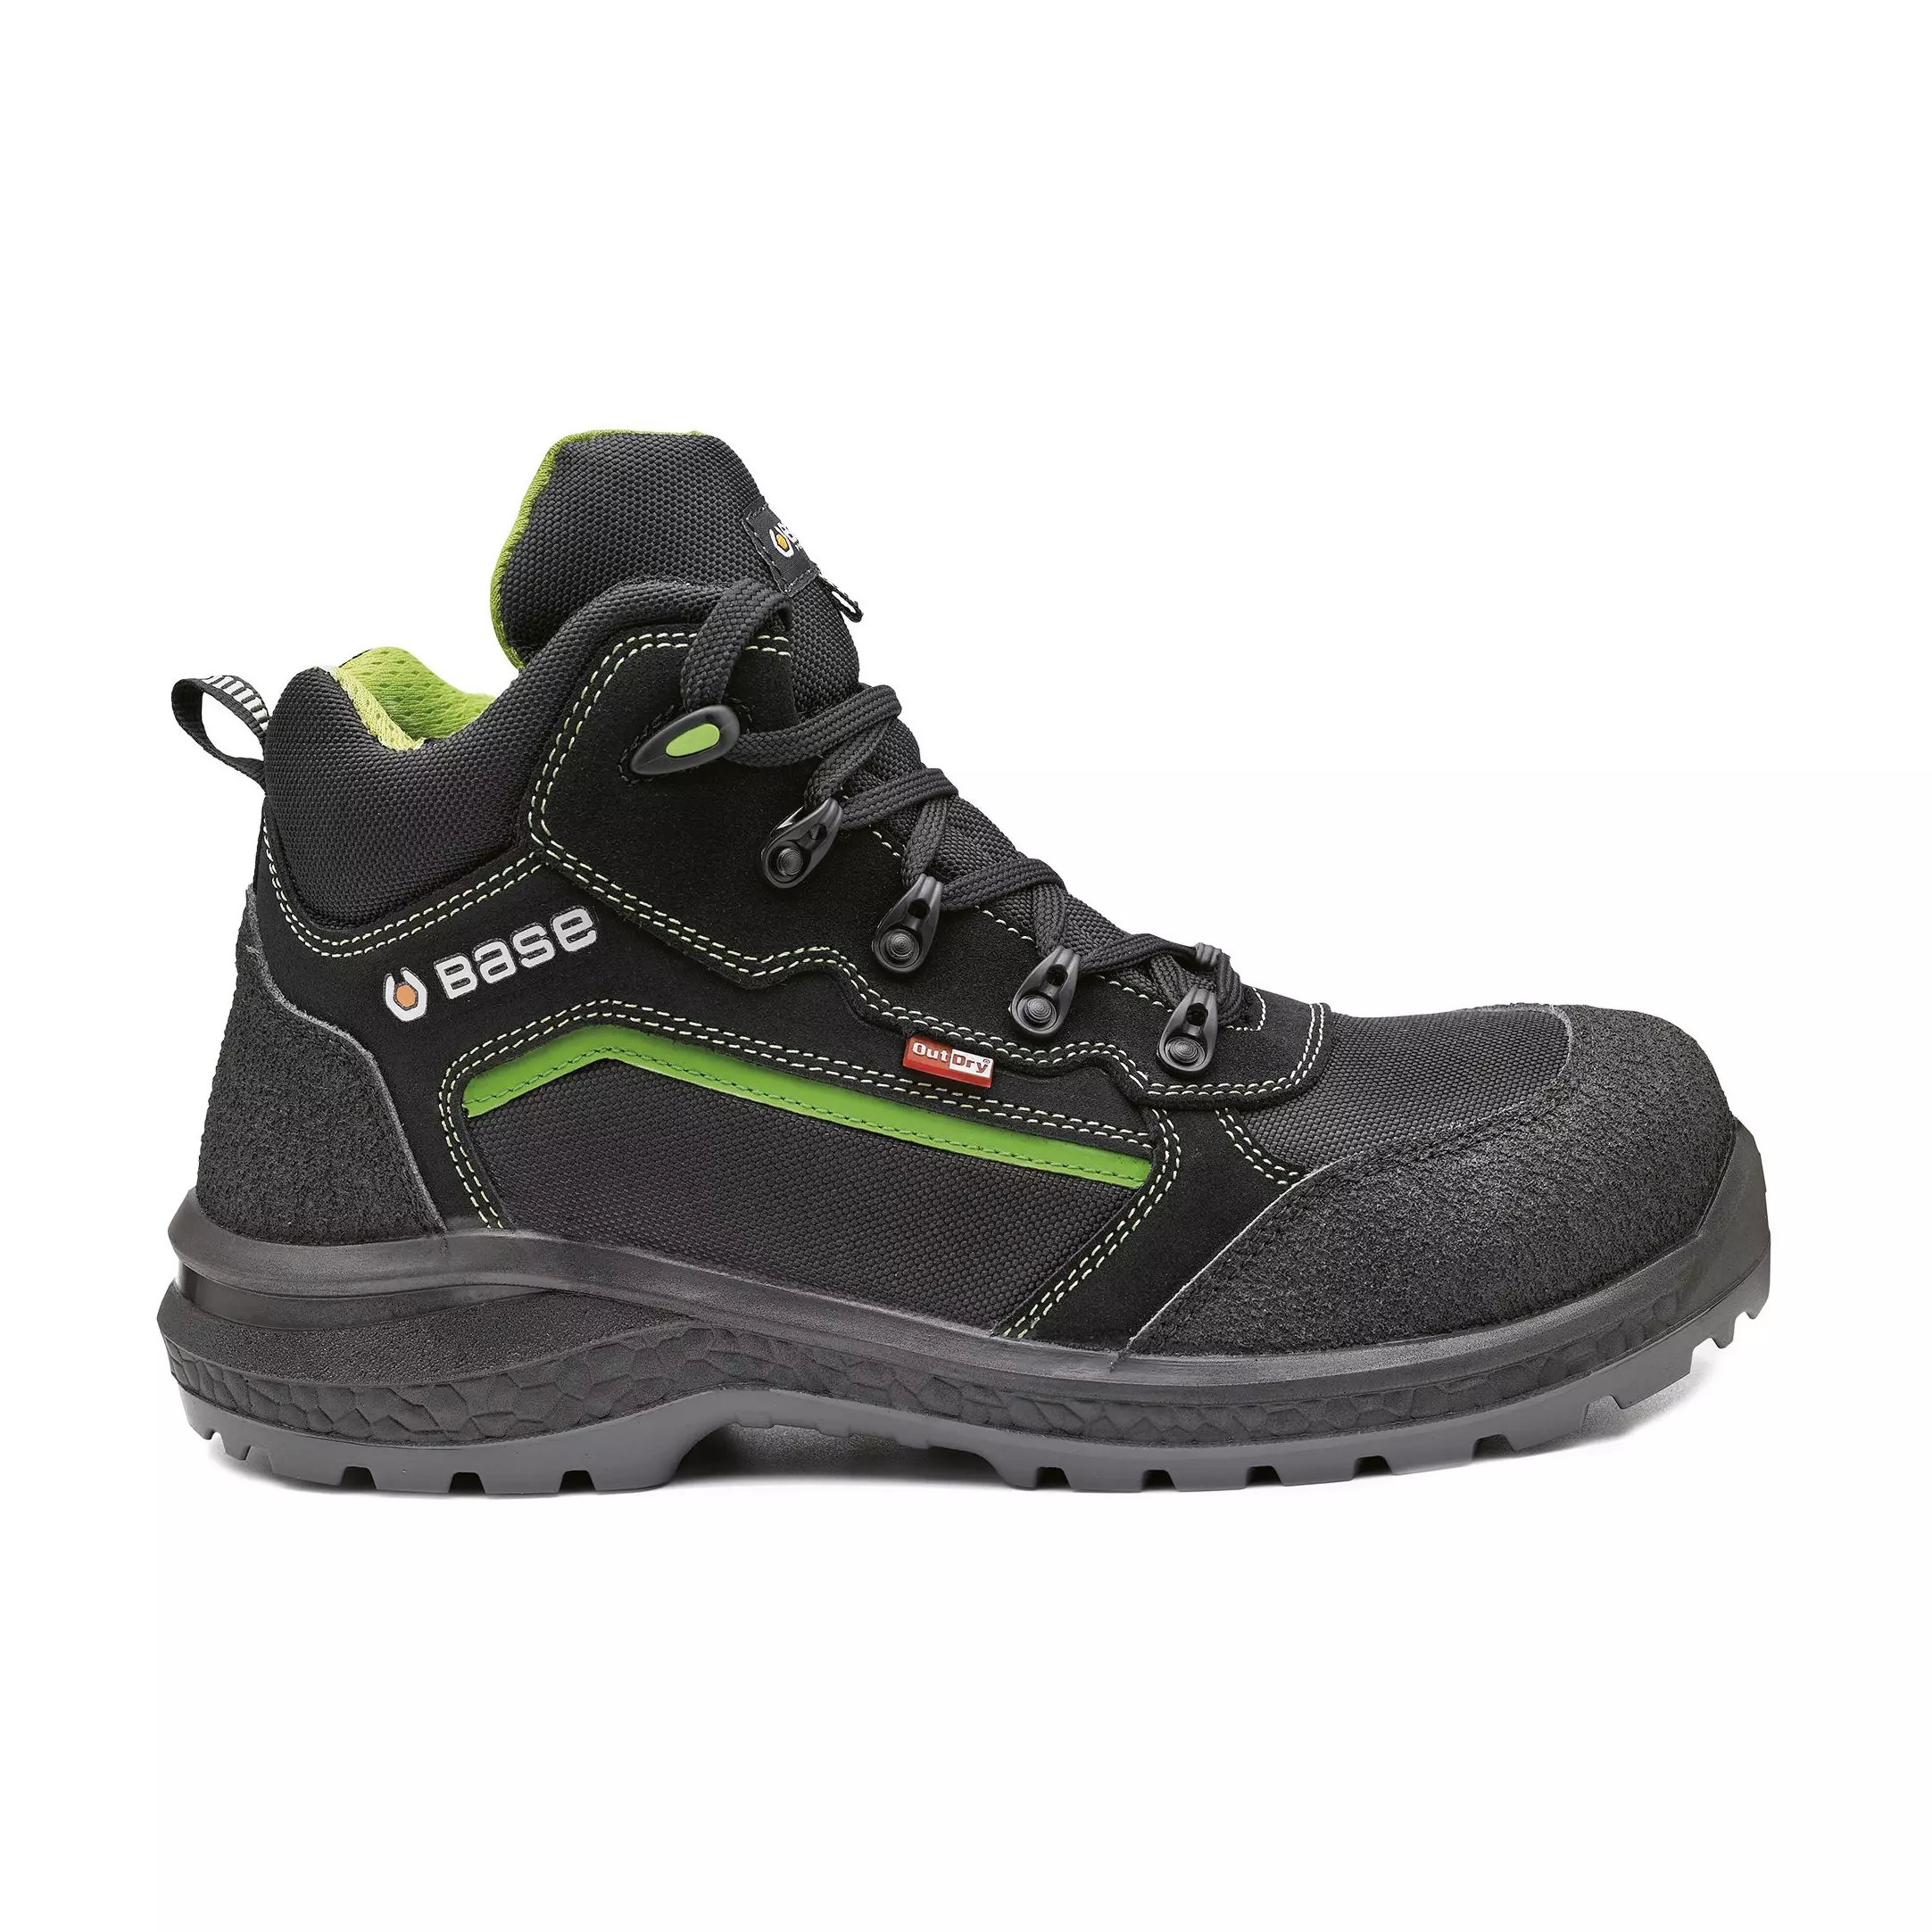 BASE SPECIAL Be-Powerful B0898 Stiefel S3 WR SRC - 48